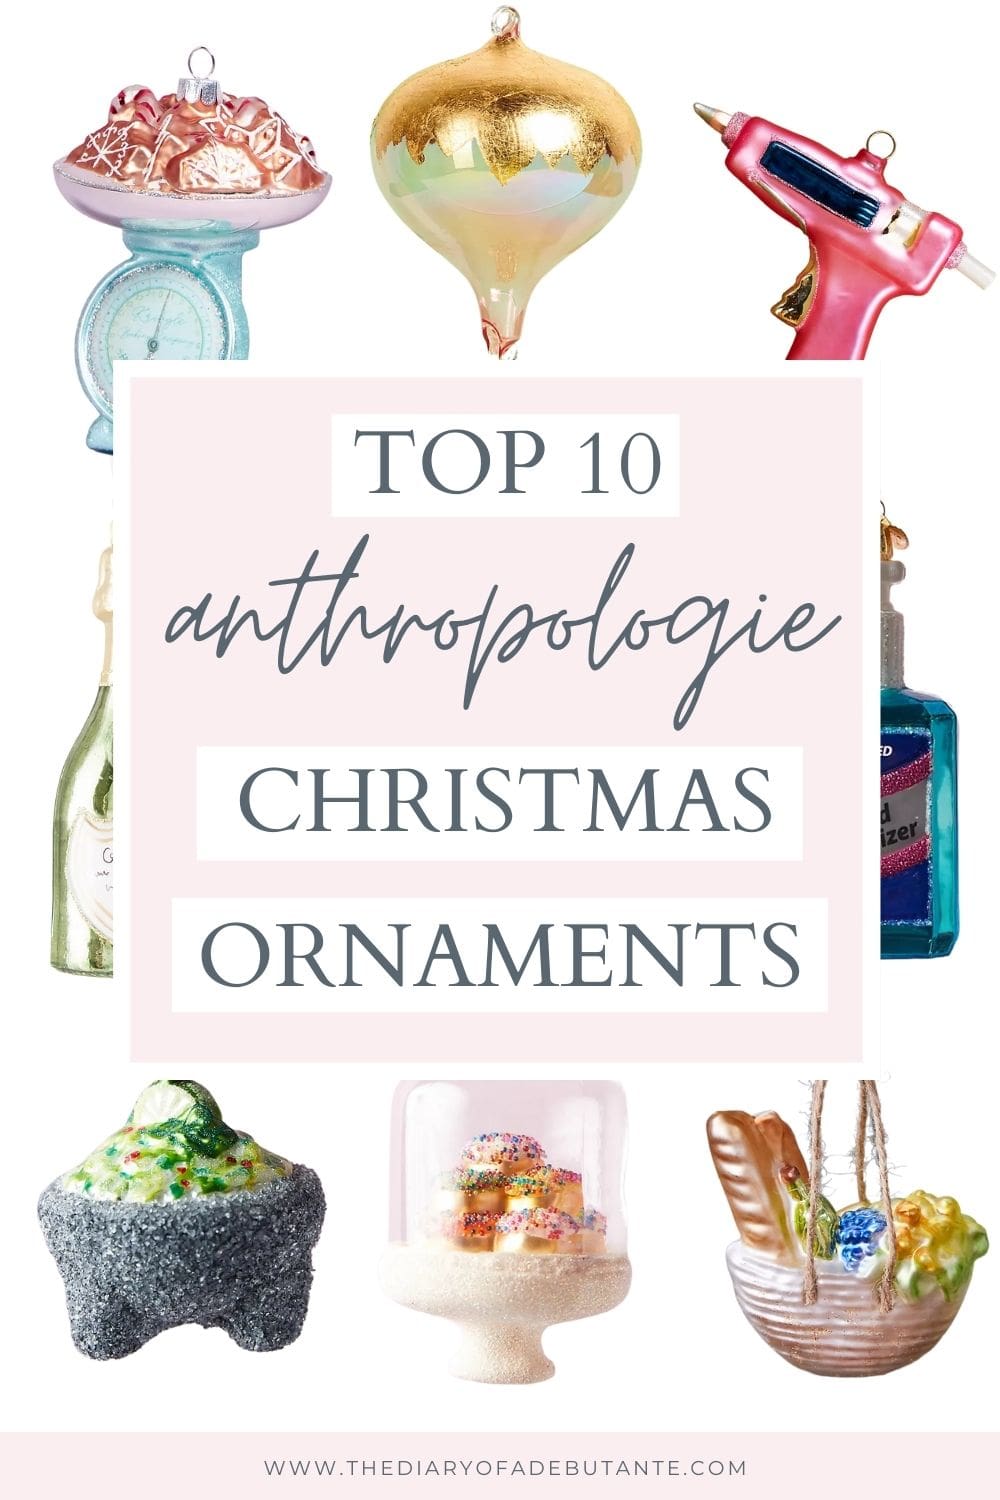 Best Anthropologie Ornaments 2021 curated by blogger Stephanie Ziajka on Diary of a Debutante